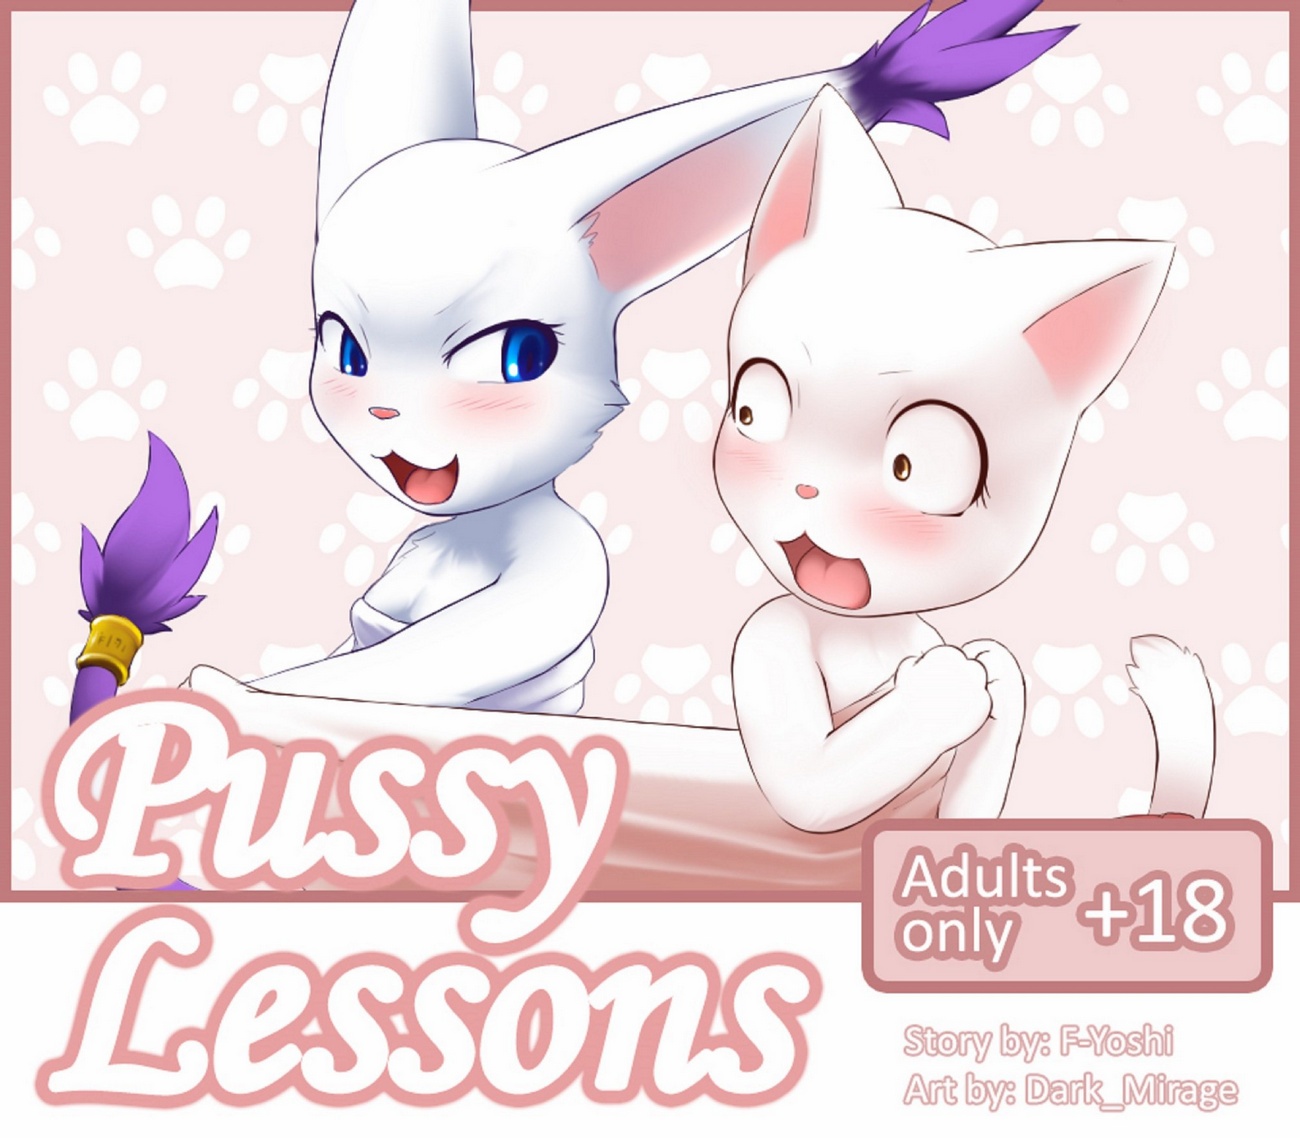 Pussy Lessons00